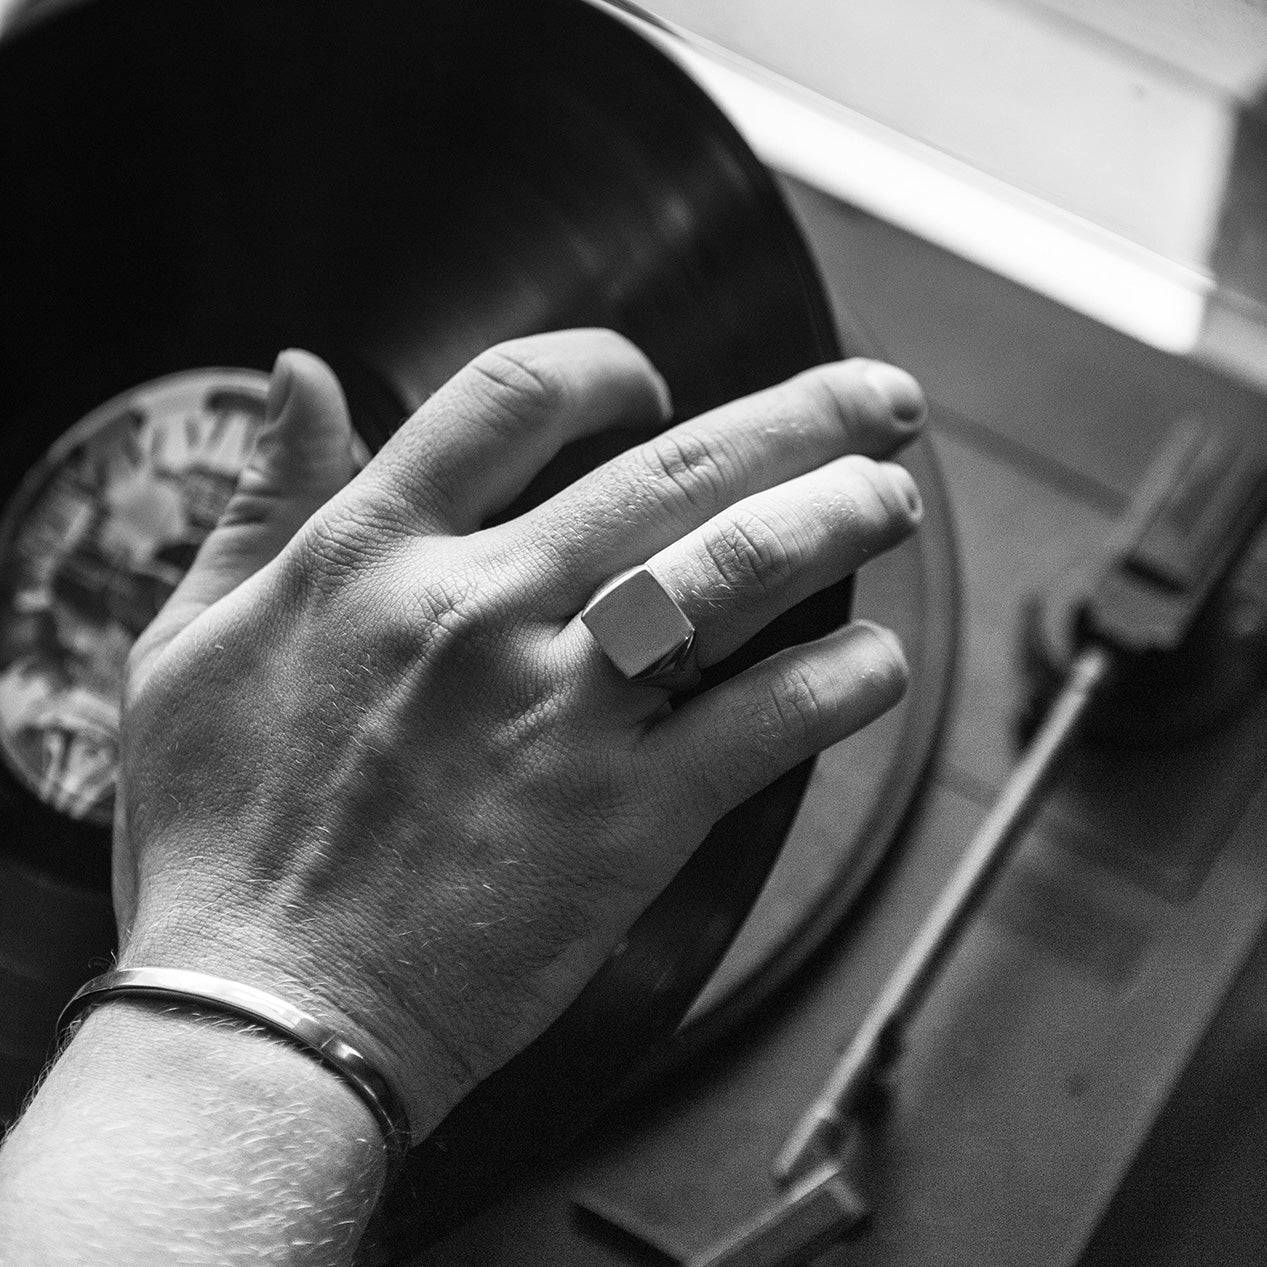 hand and wrist wearing a titanium signet ring and a titanium bracelet, reach for a record player.